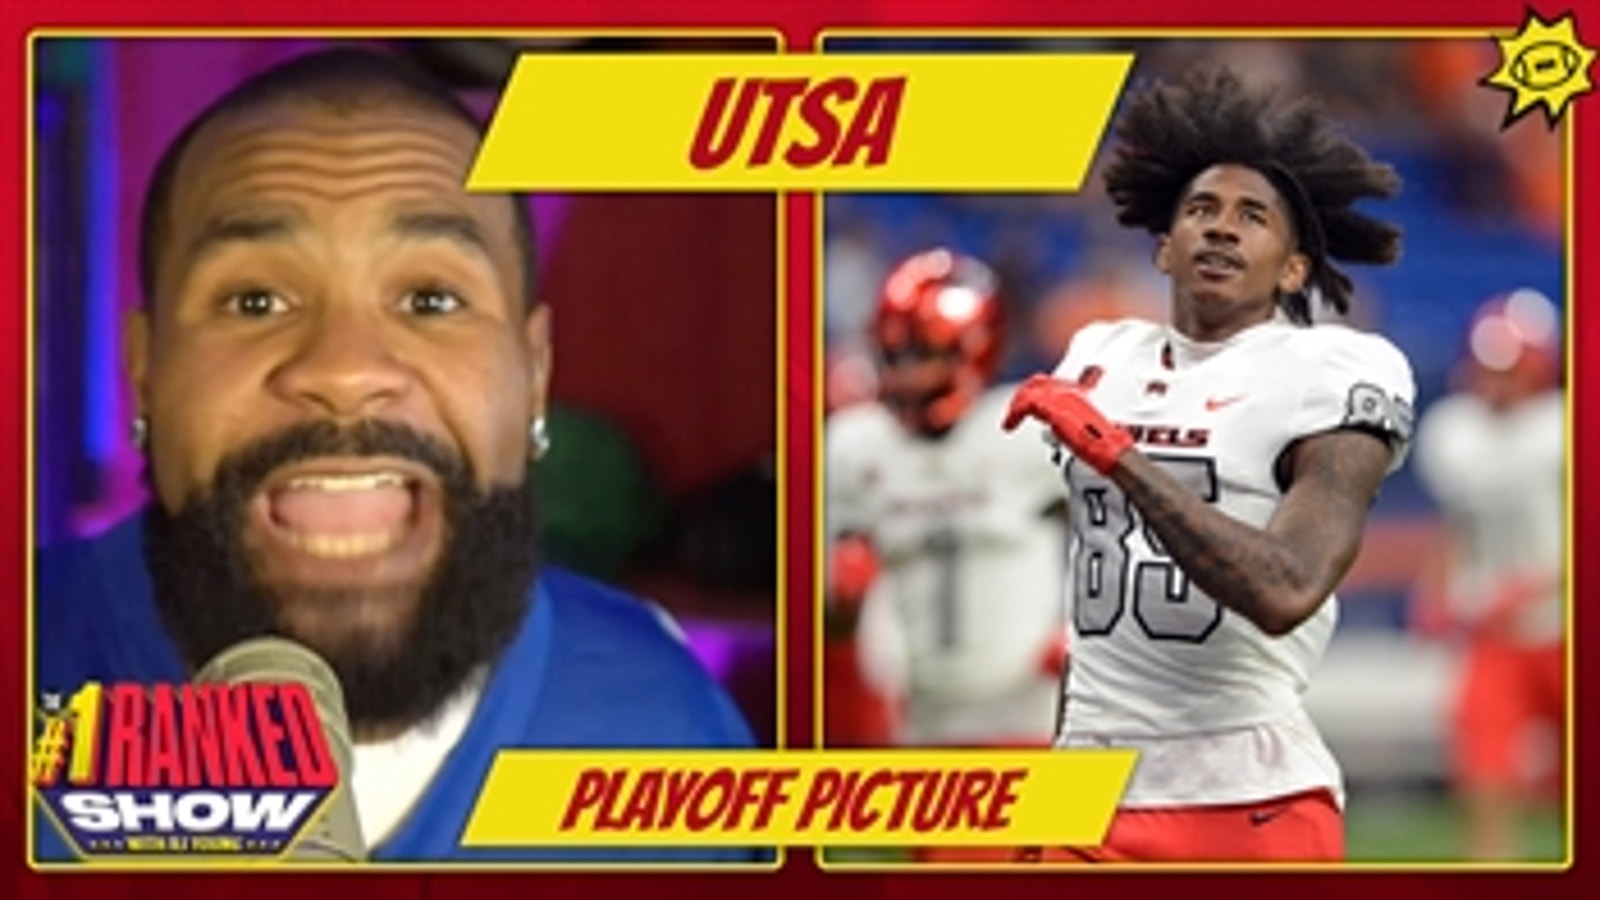 RJ Young: UTSA (10-0) deserves a shot at the College Football Playoff